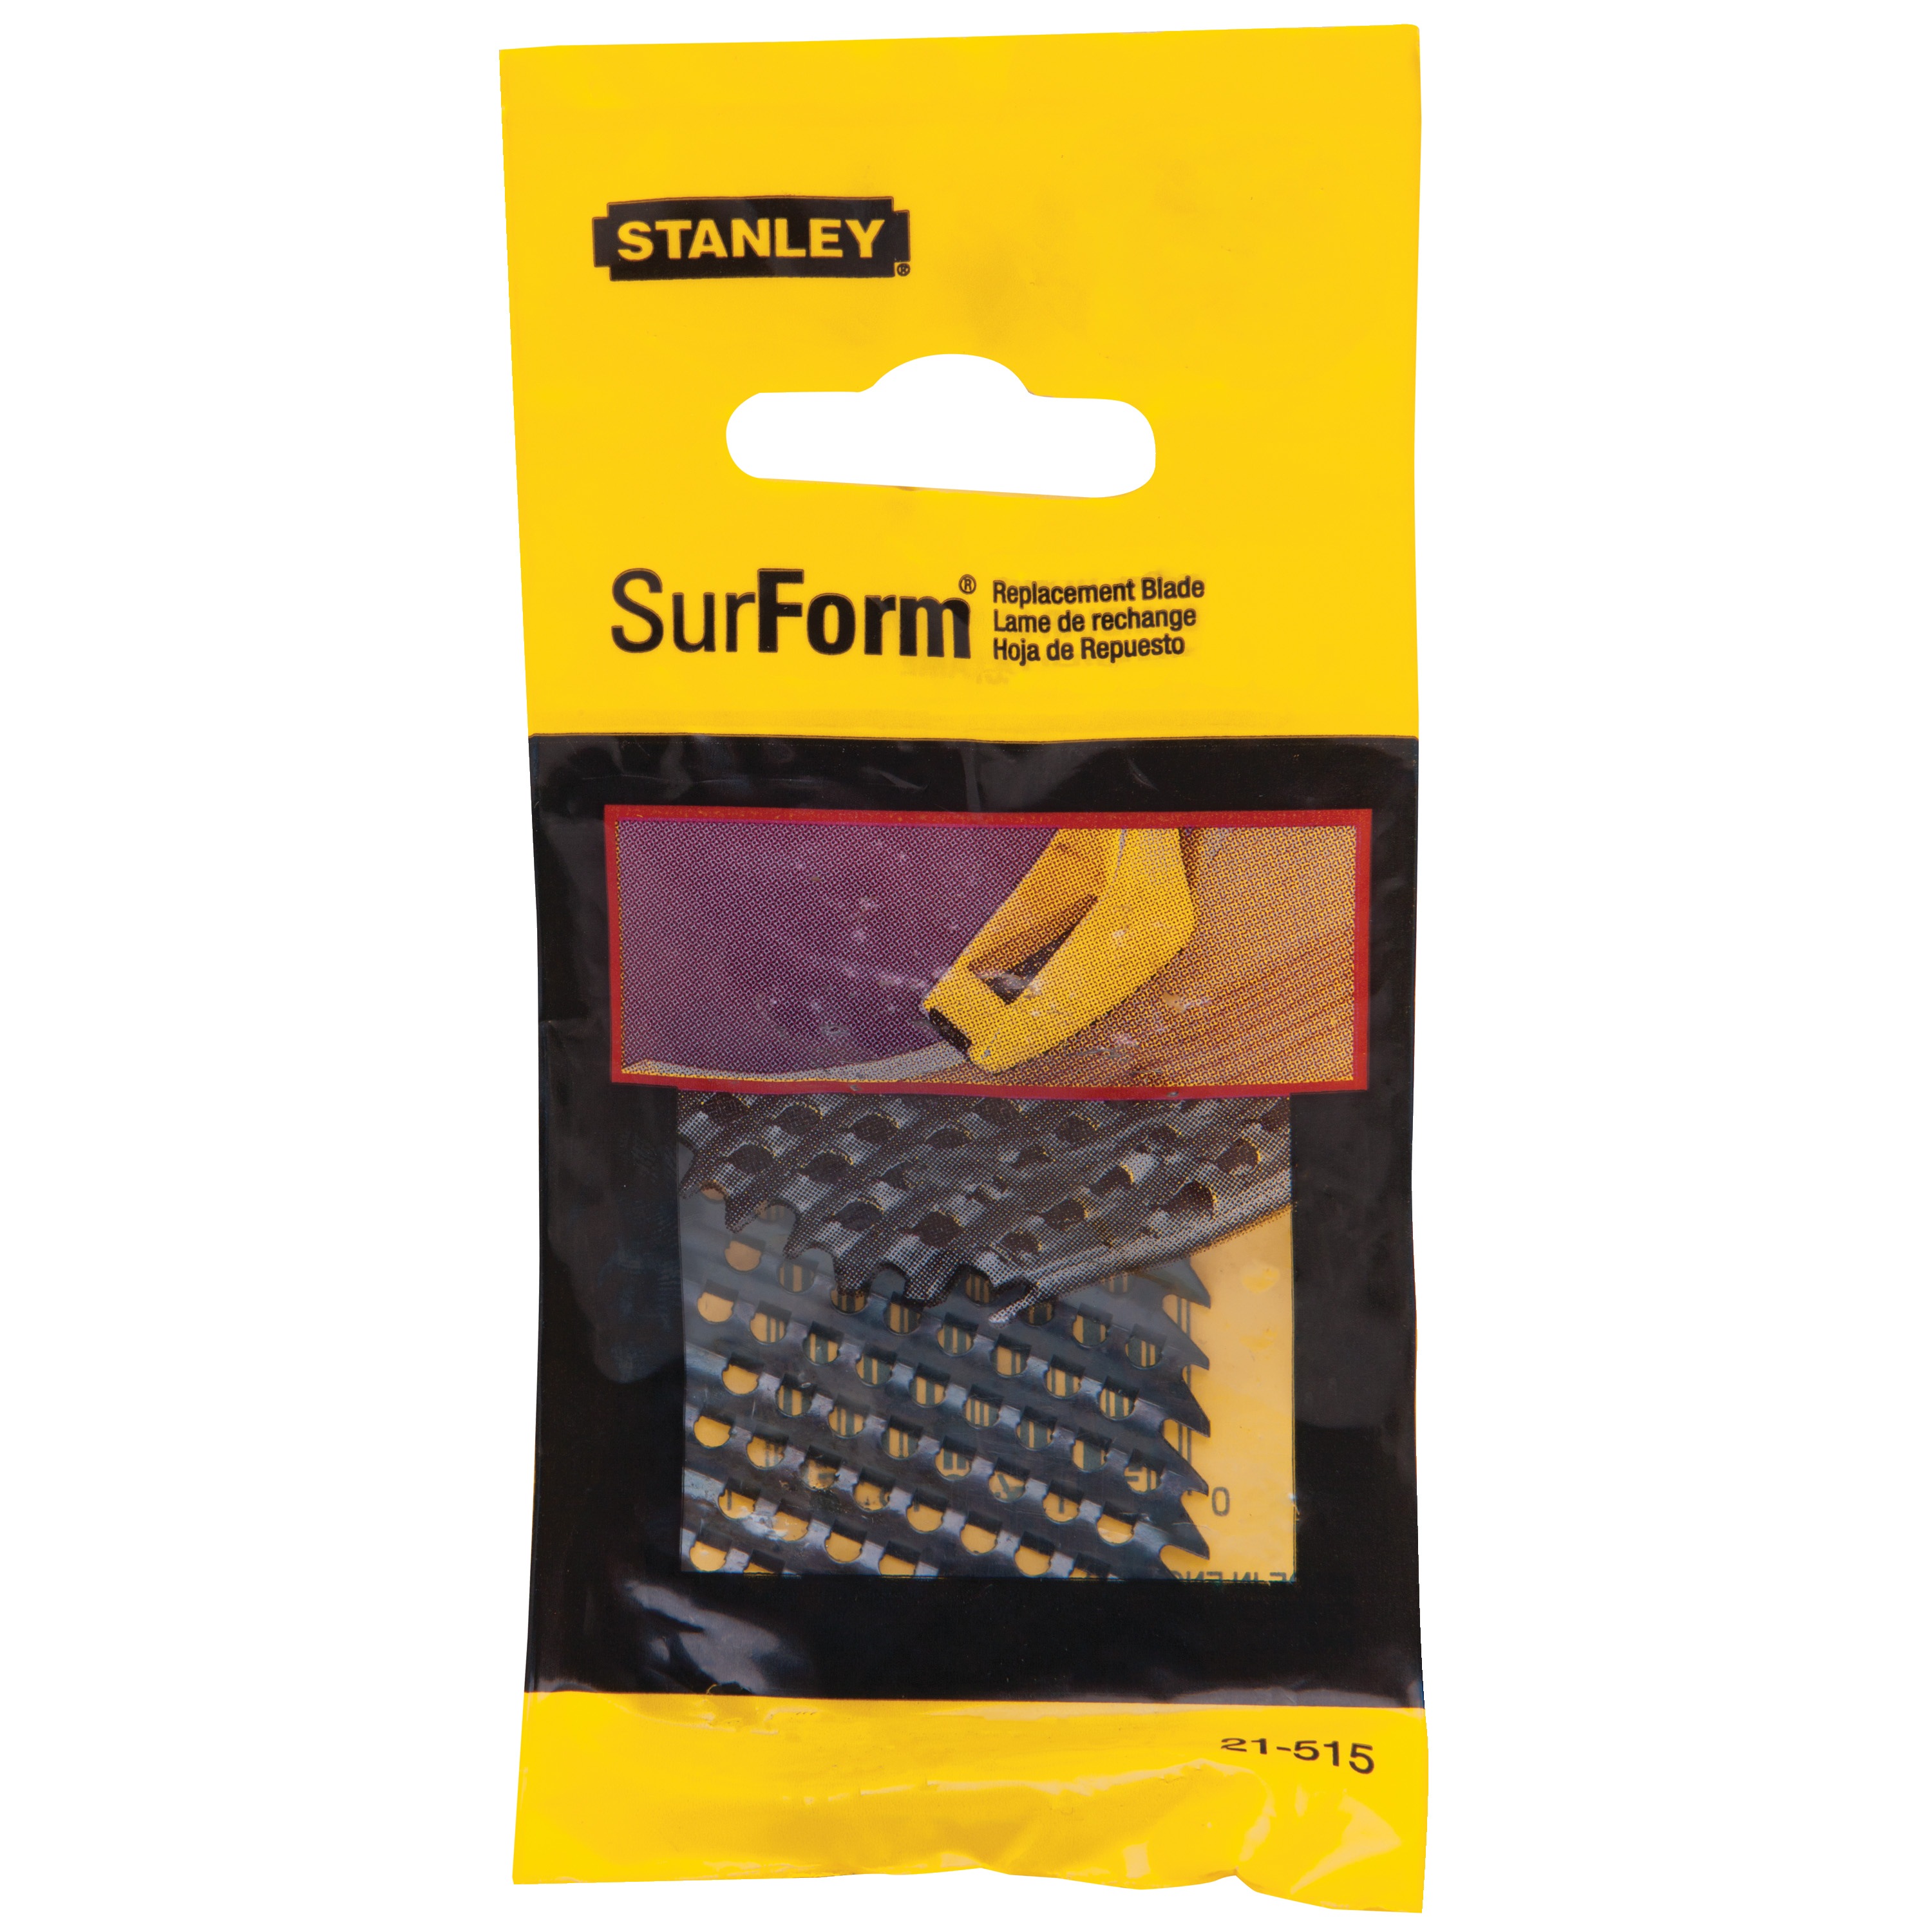 Stanley Tools - 212 in Surform Shaver Replacement Blade - 21-515